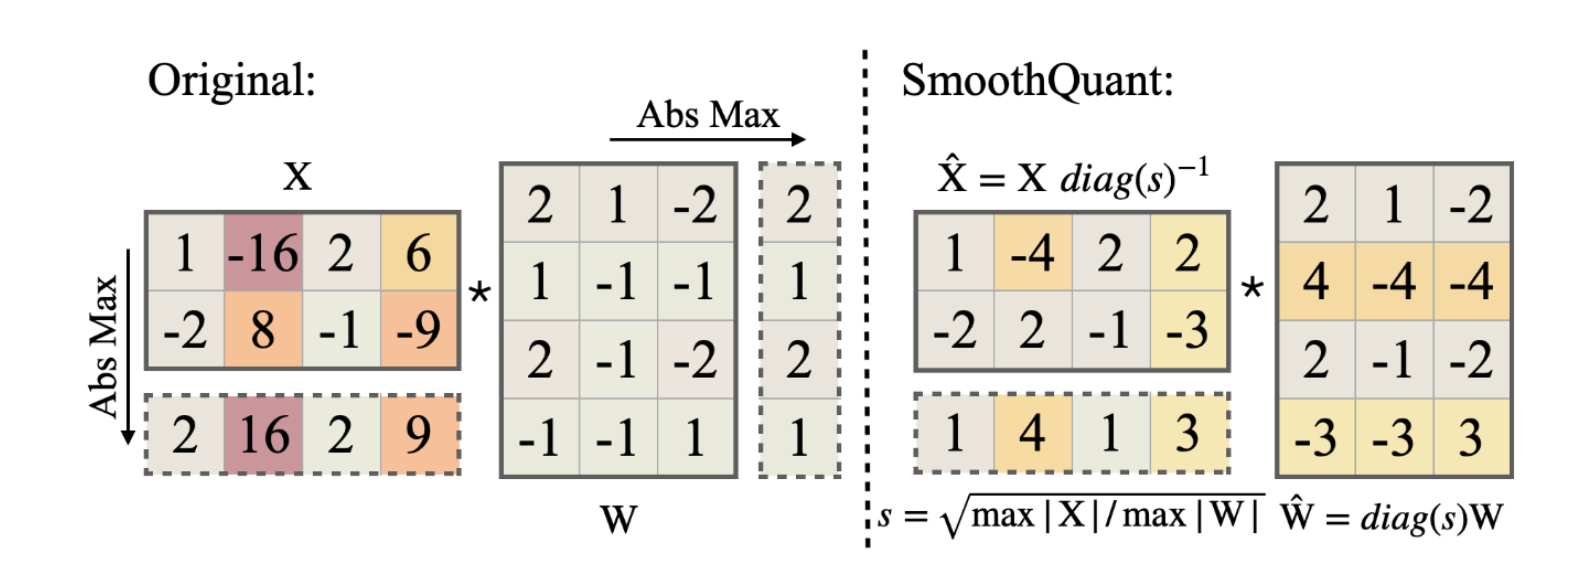 SmoothQuant example